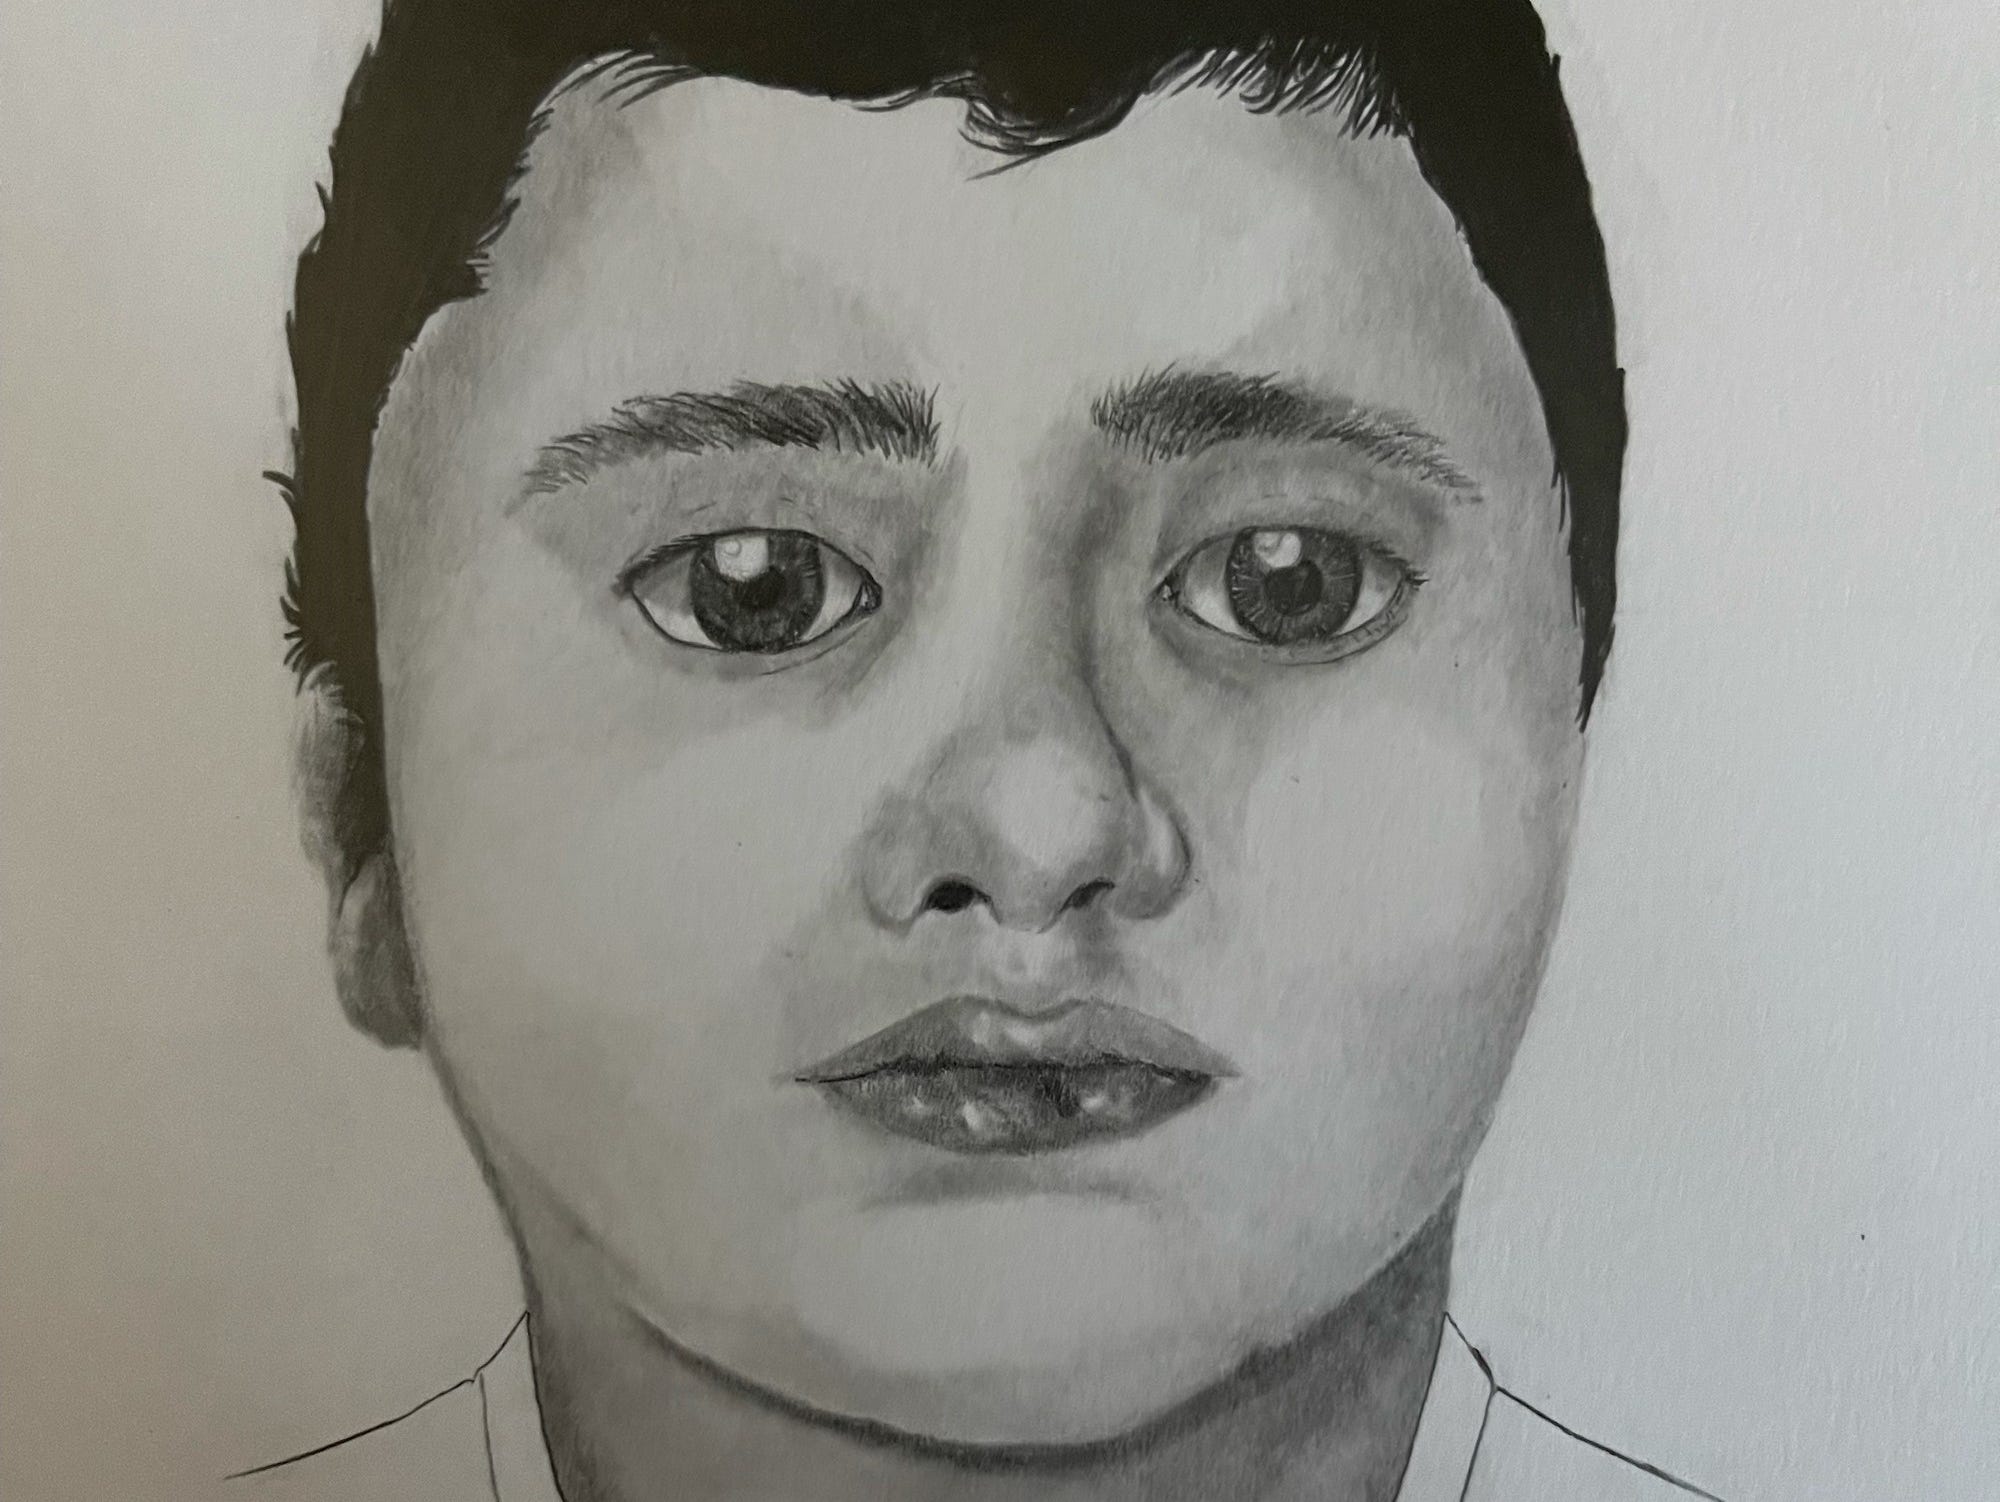 A pencil sketch portrait of a young boy, used in the LVMPD's attempts to identify a body found near Las Vegas.